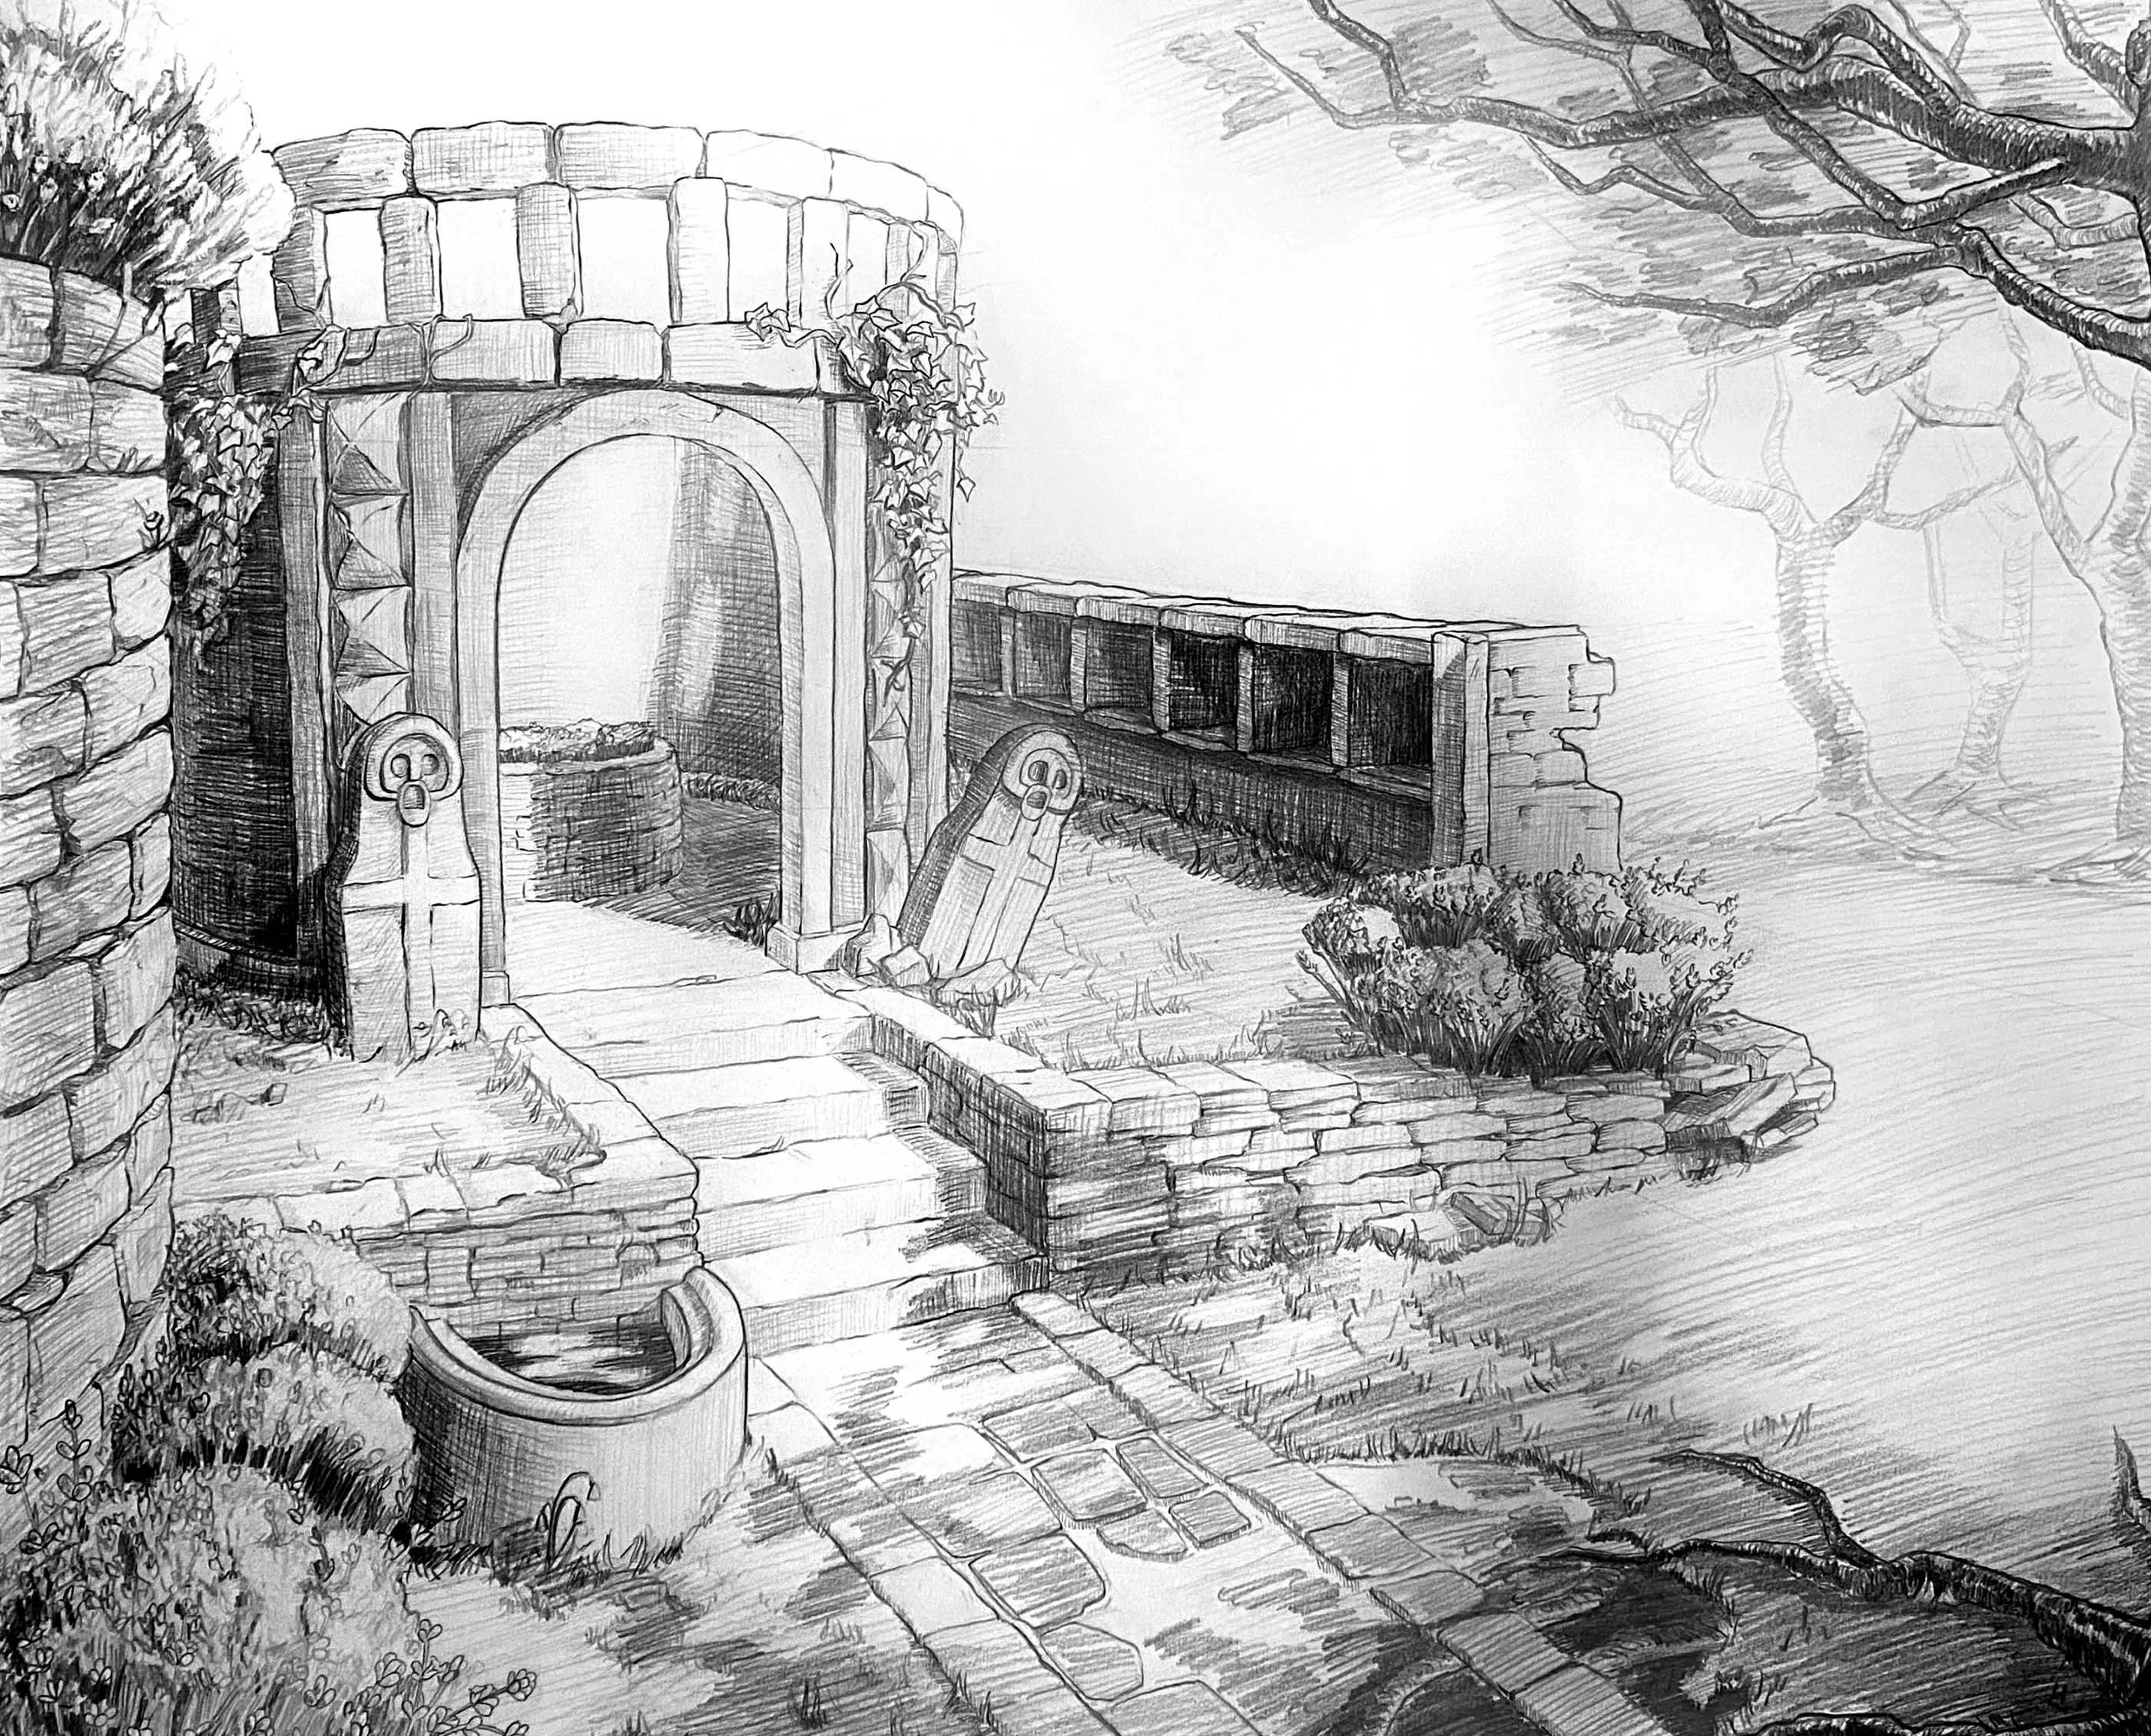 A drawing of a dilapidated shrine and well.